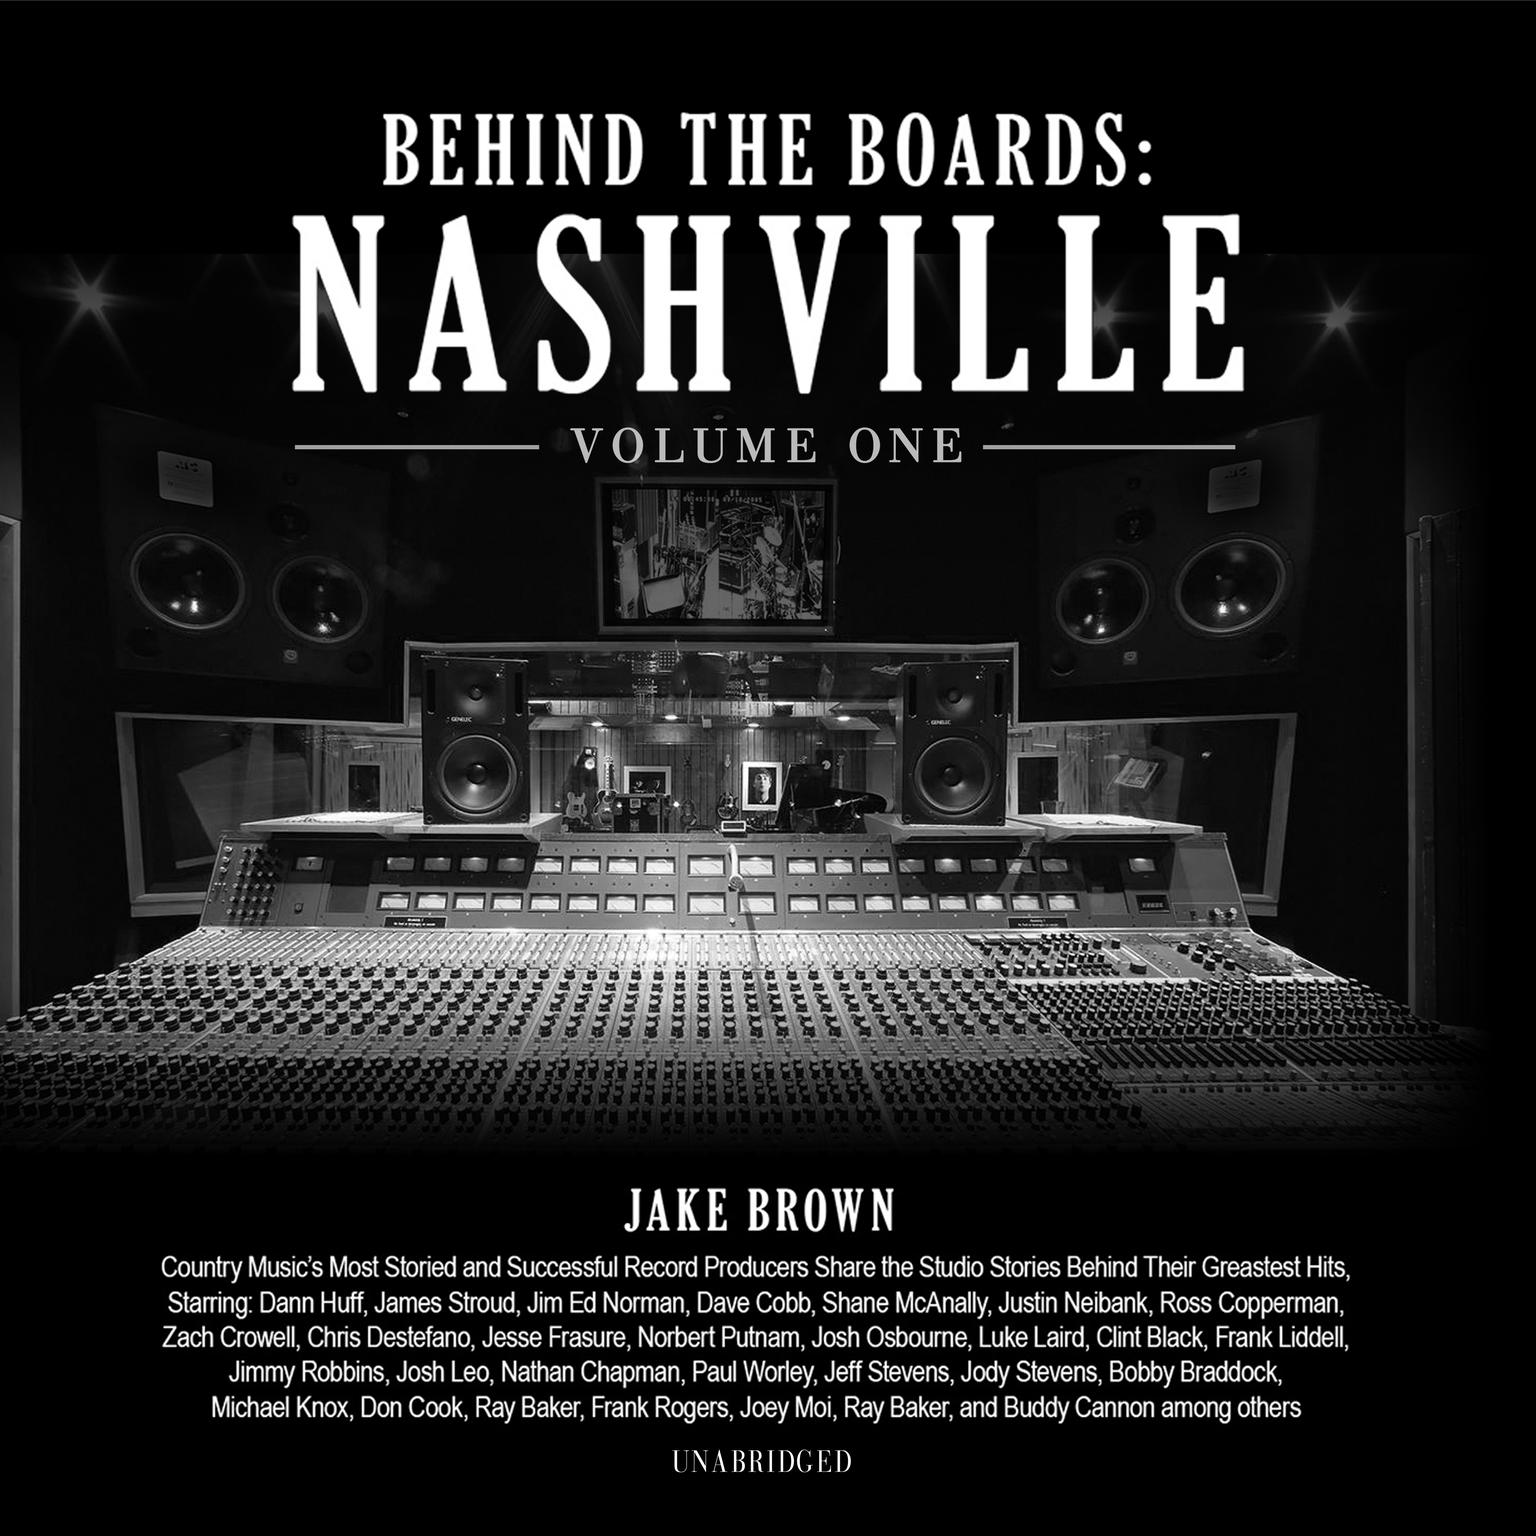 Behind the Boards: Nashville, Vol. 1: The Studio Stories Behind Country Music’s Greatest Hits Audiobook, by Jake Brown